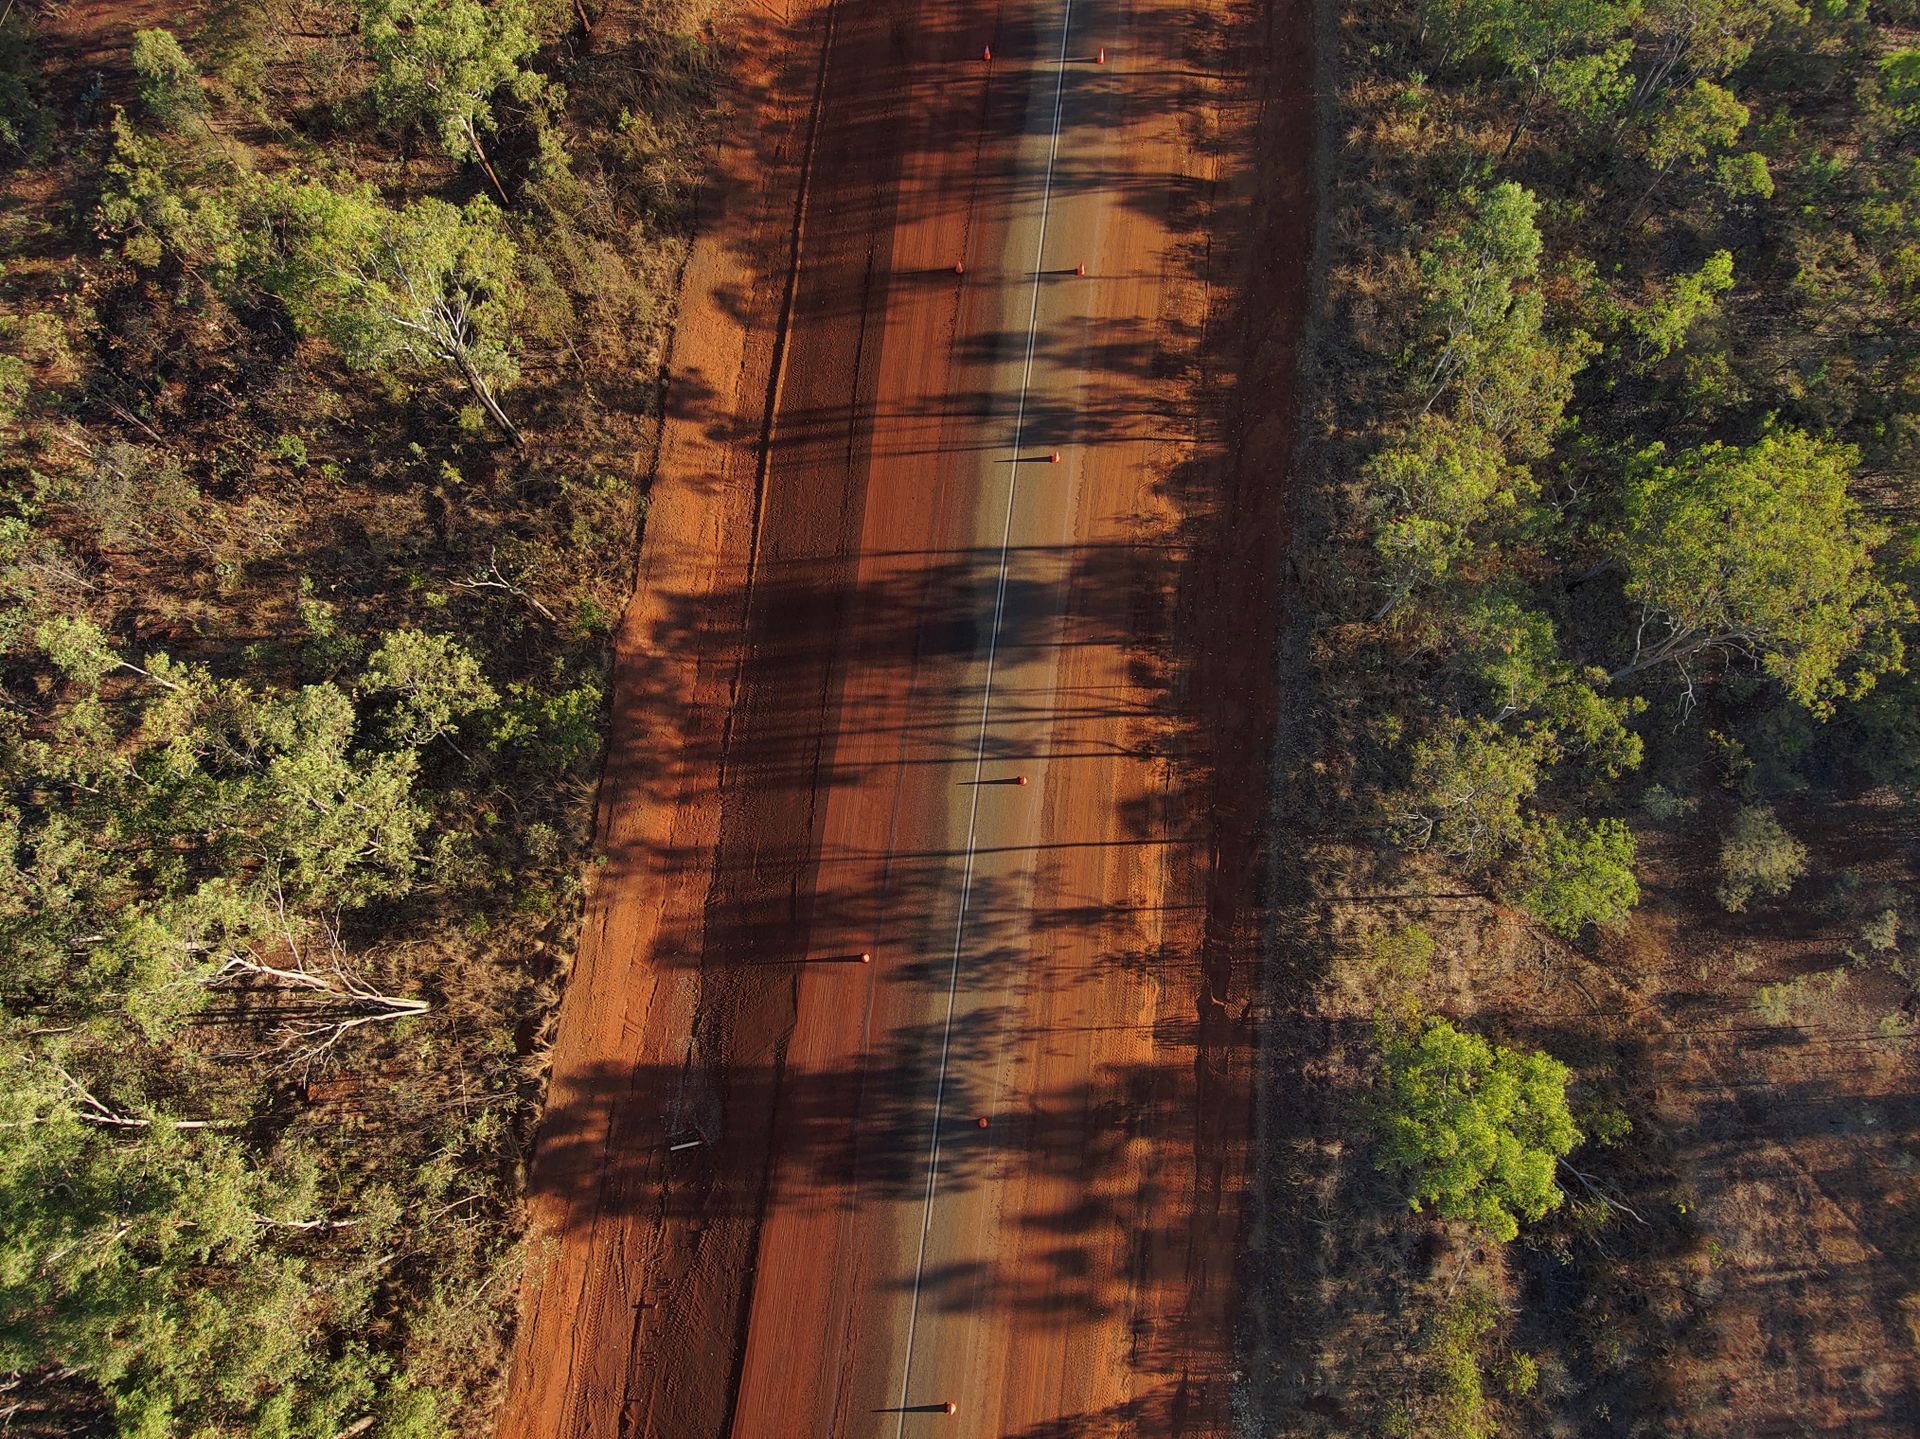 An aerial view of a dirt road surrounded by trees